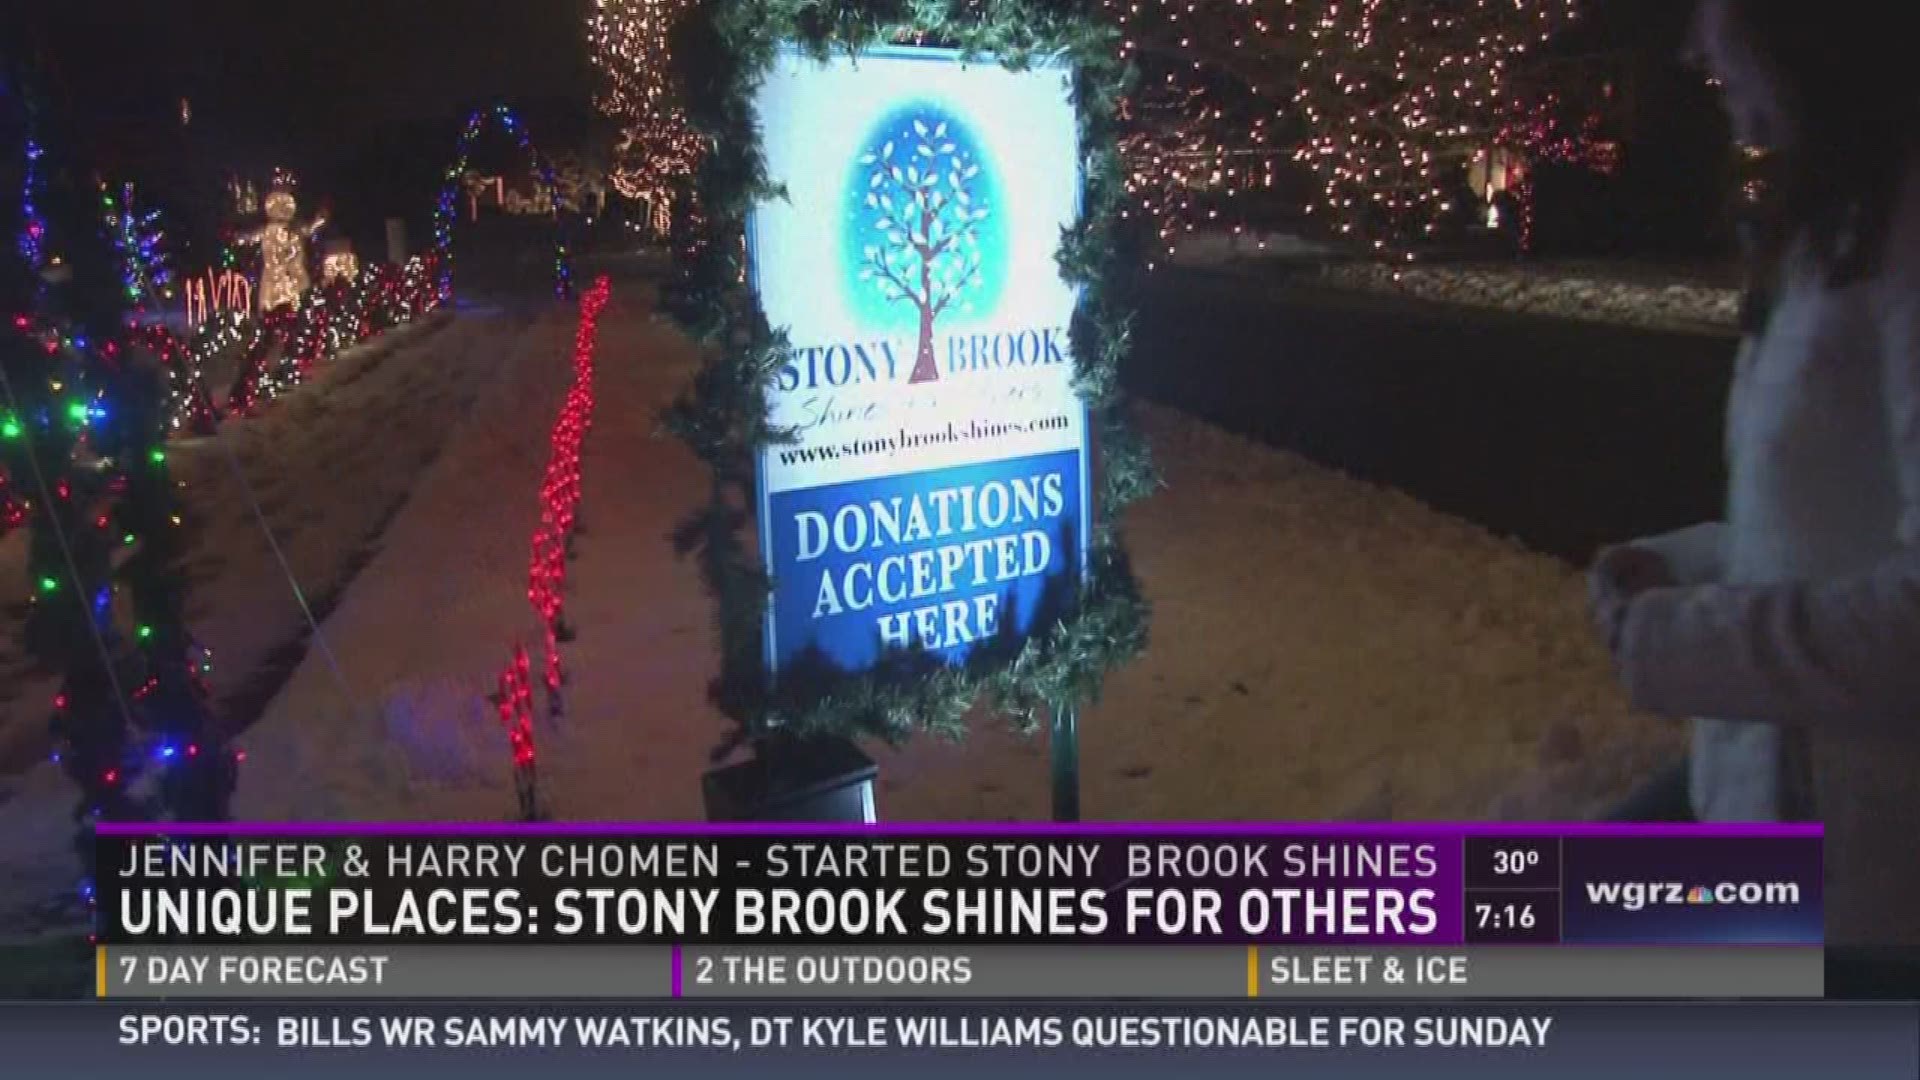 Daybreak's Melissa Holmes tells us how the Stony Brook neighborhood raises money for charity every year with its Christmas lights display in this week's Unique Places.